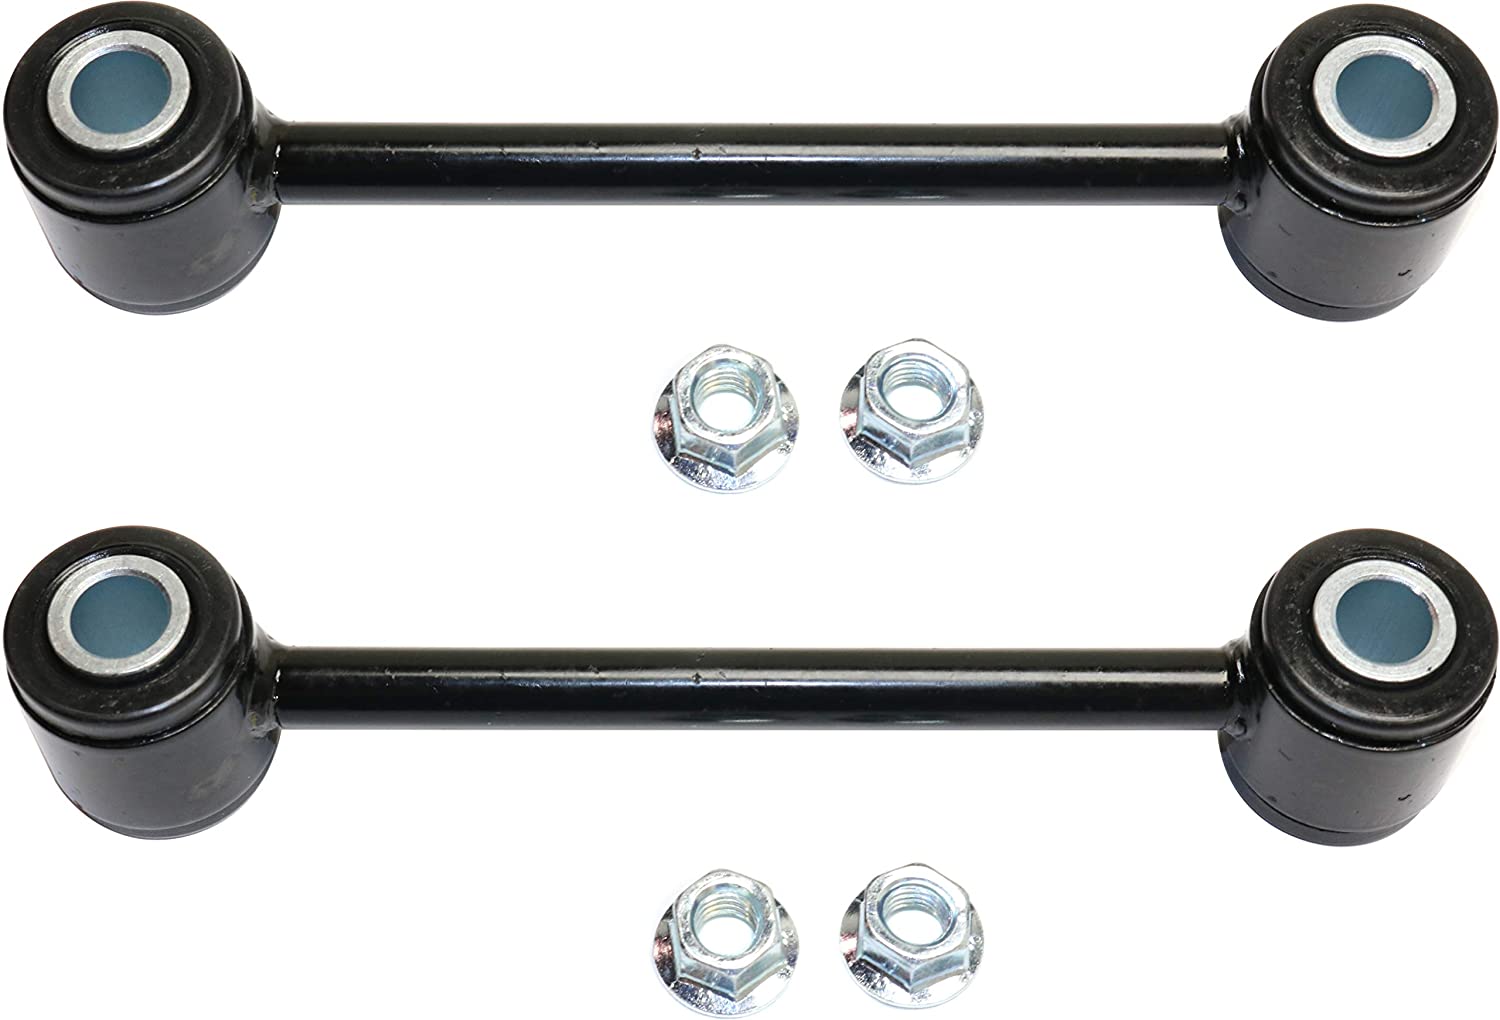 Sway Bar Link Compatible with 1997-2006 Jeep Wrangler (TJ) Set of 2 Rear Passenger and Driver Side